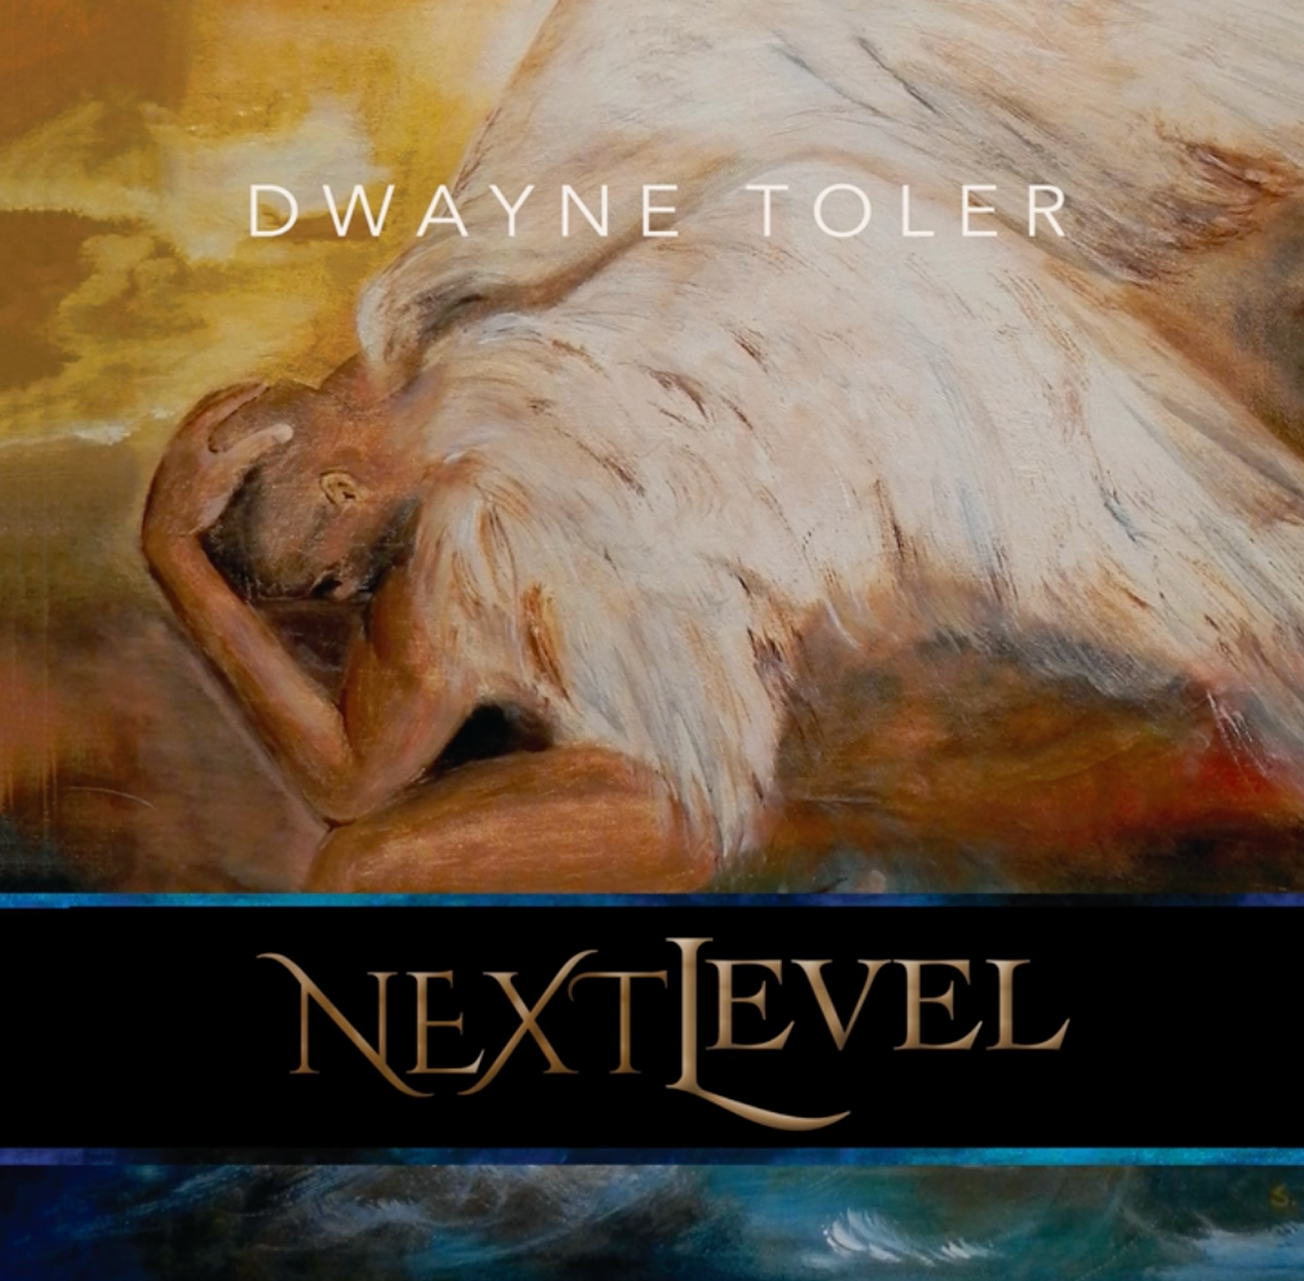 Next Level by Dwayne Toler CD cover